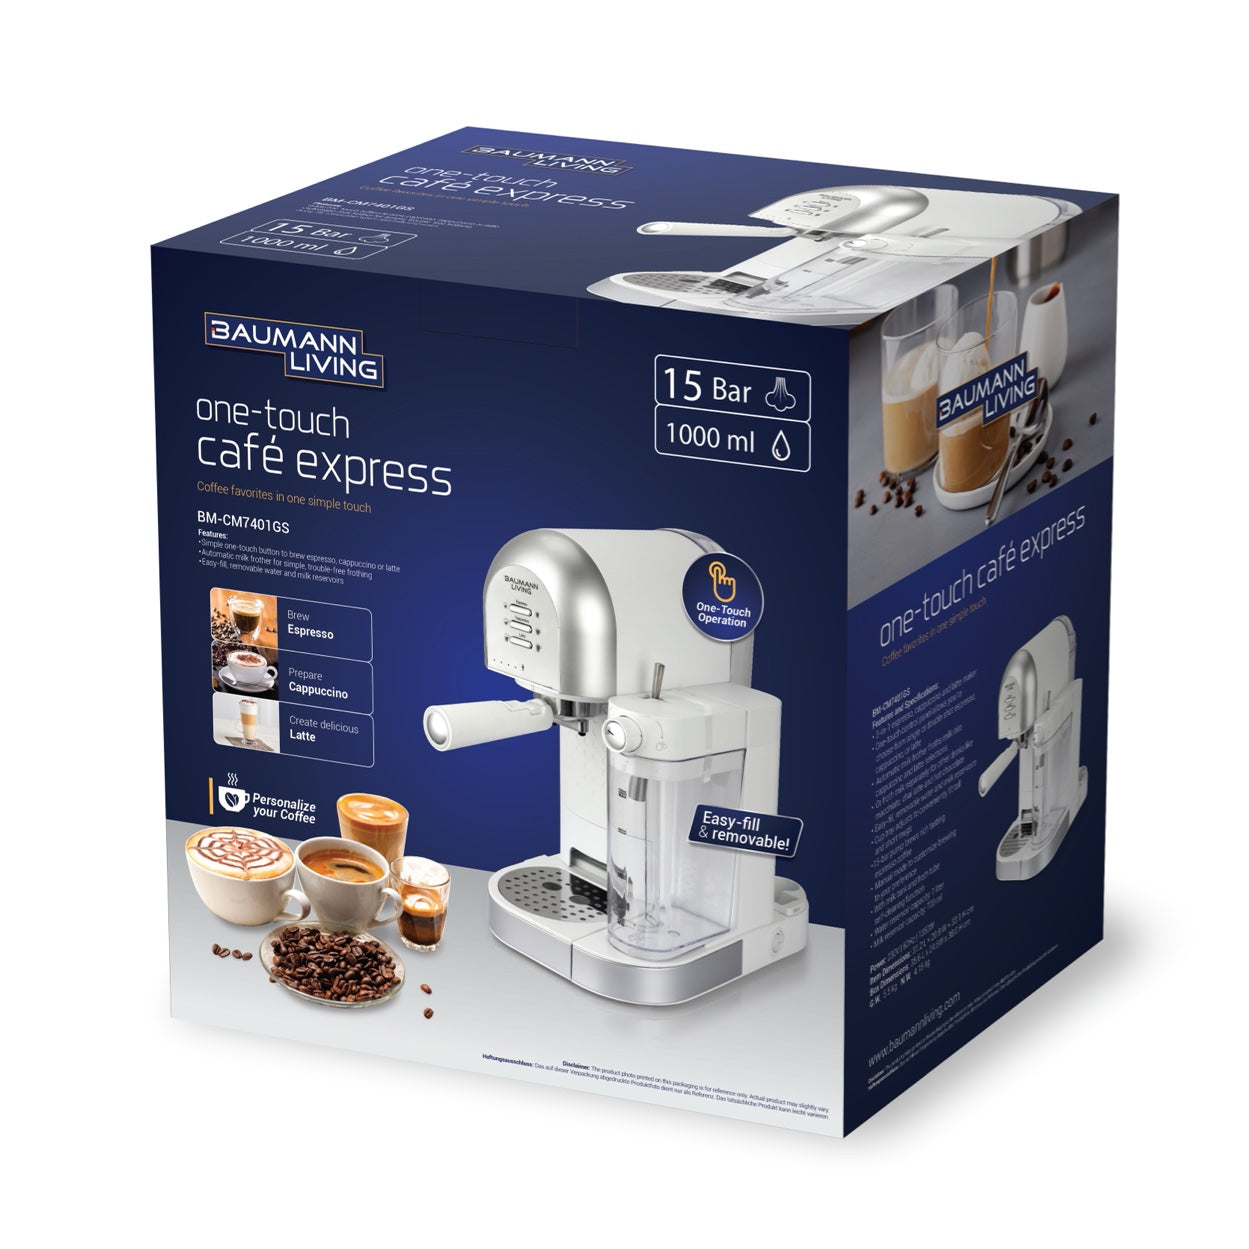 One-Touch Café Express (Limited Edition)